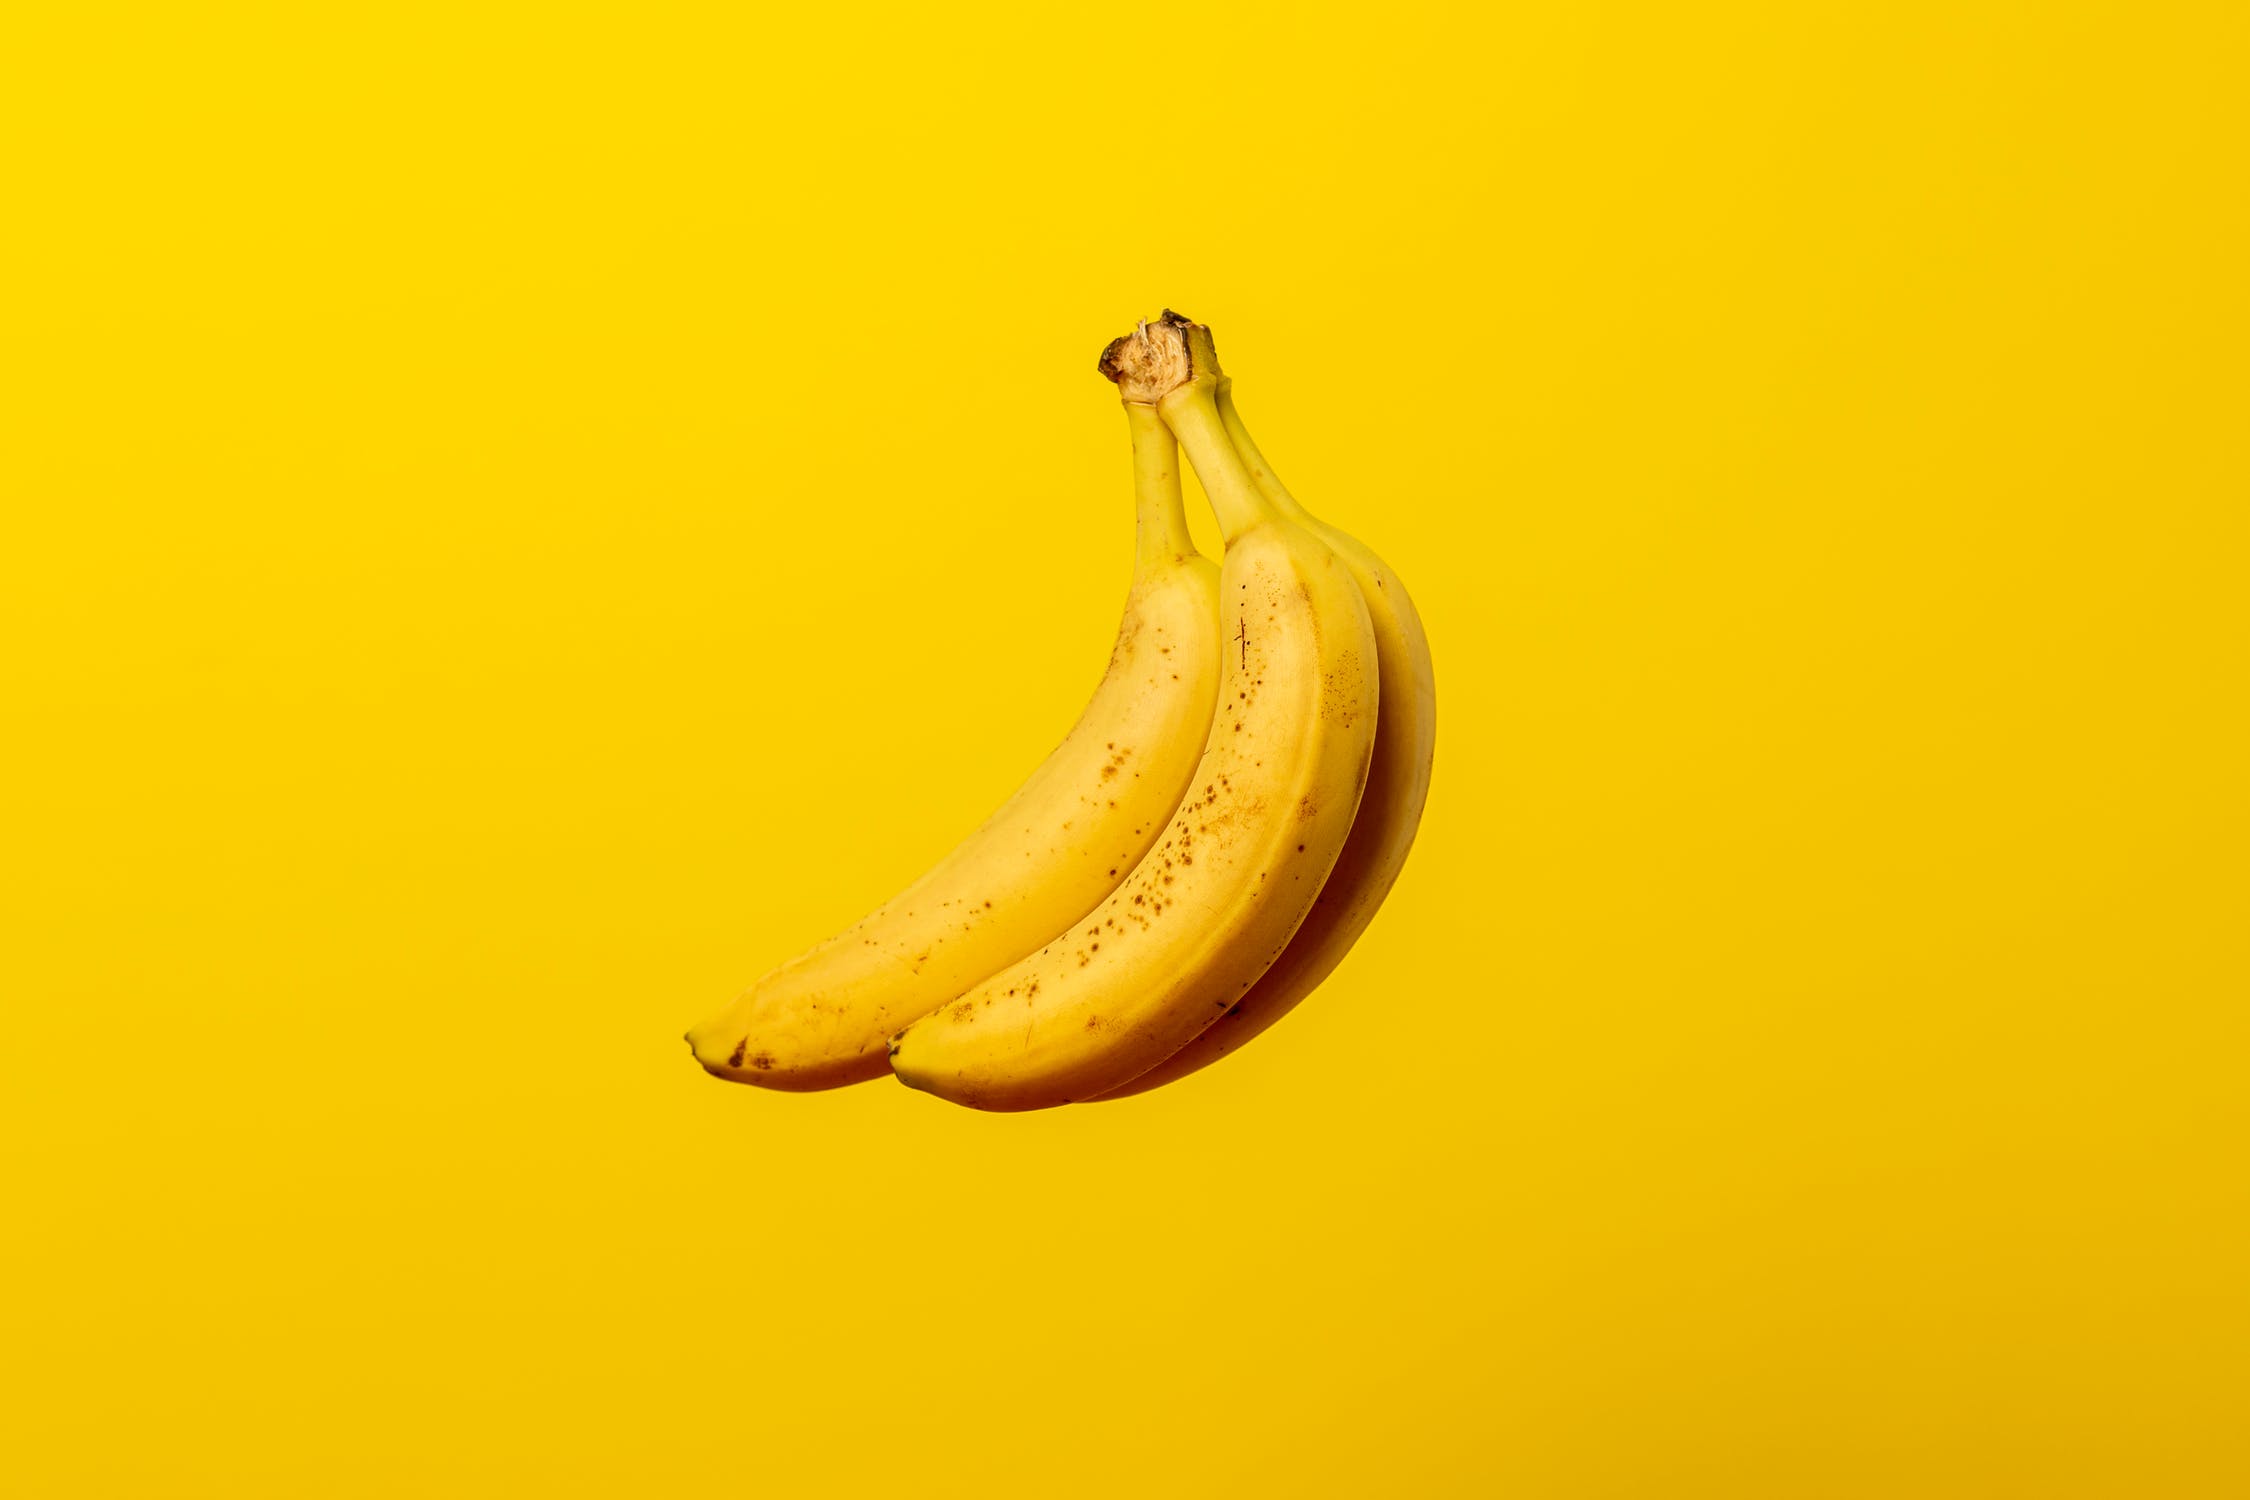 WHAT’S THE DIFFERENCE BETWEEN A ‘PERFECT’ BANANA AND AN ‘IMPERFECT’ BANANA?